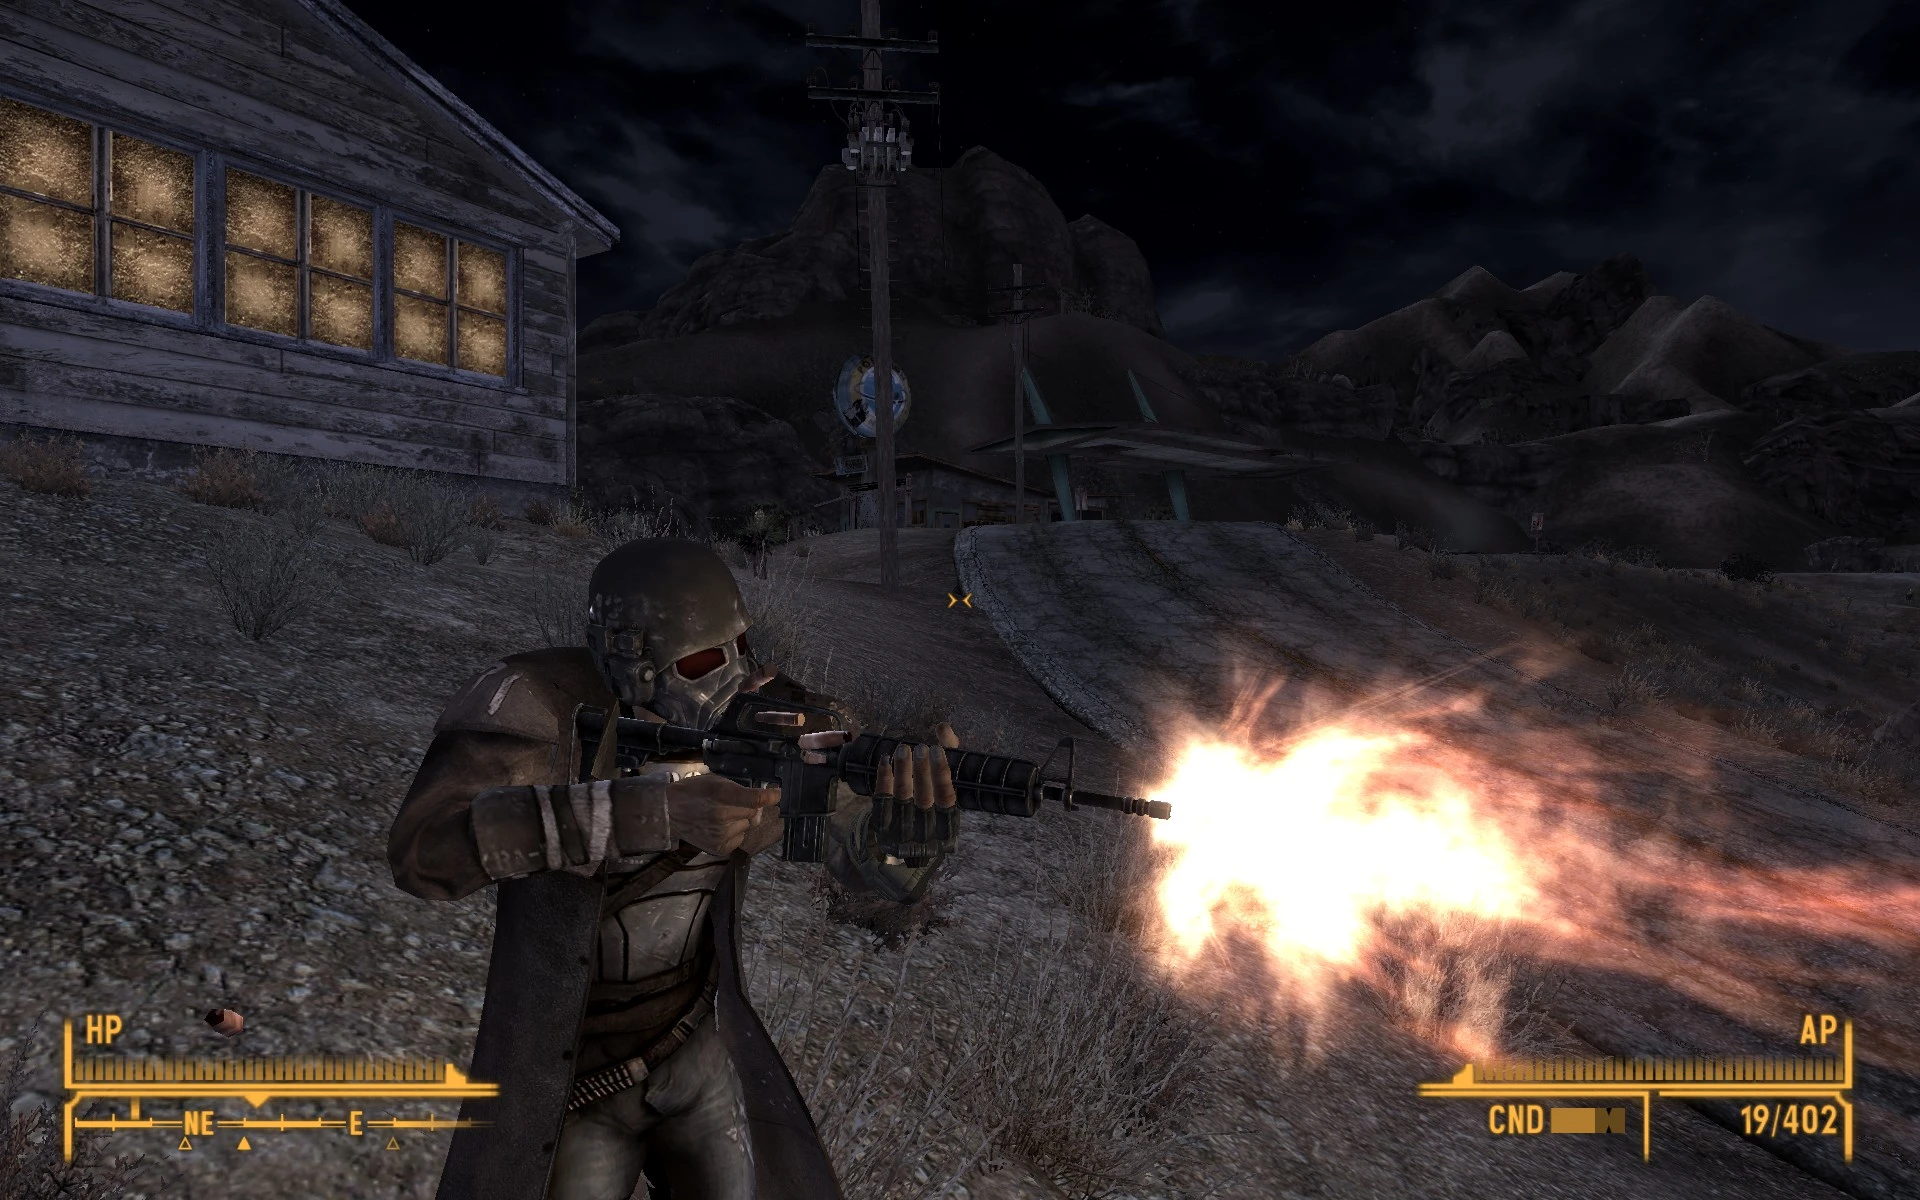 NCR Ranger Combat Armor at Fallout New Vegas mods and